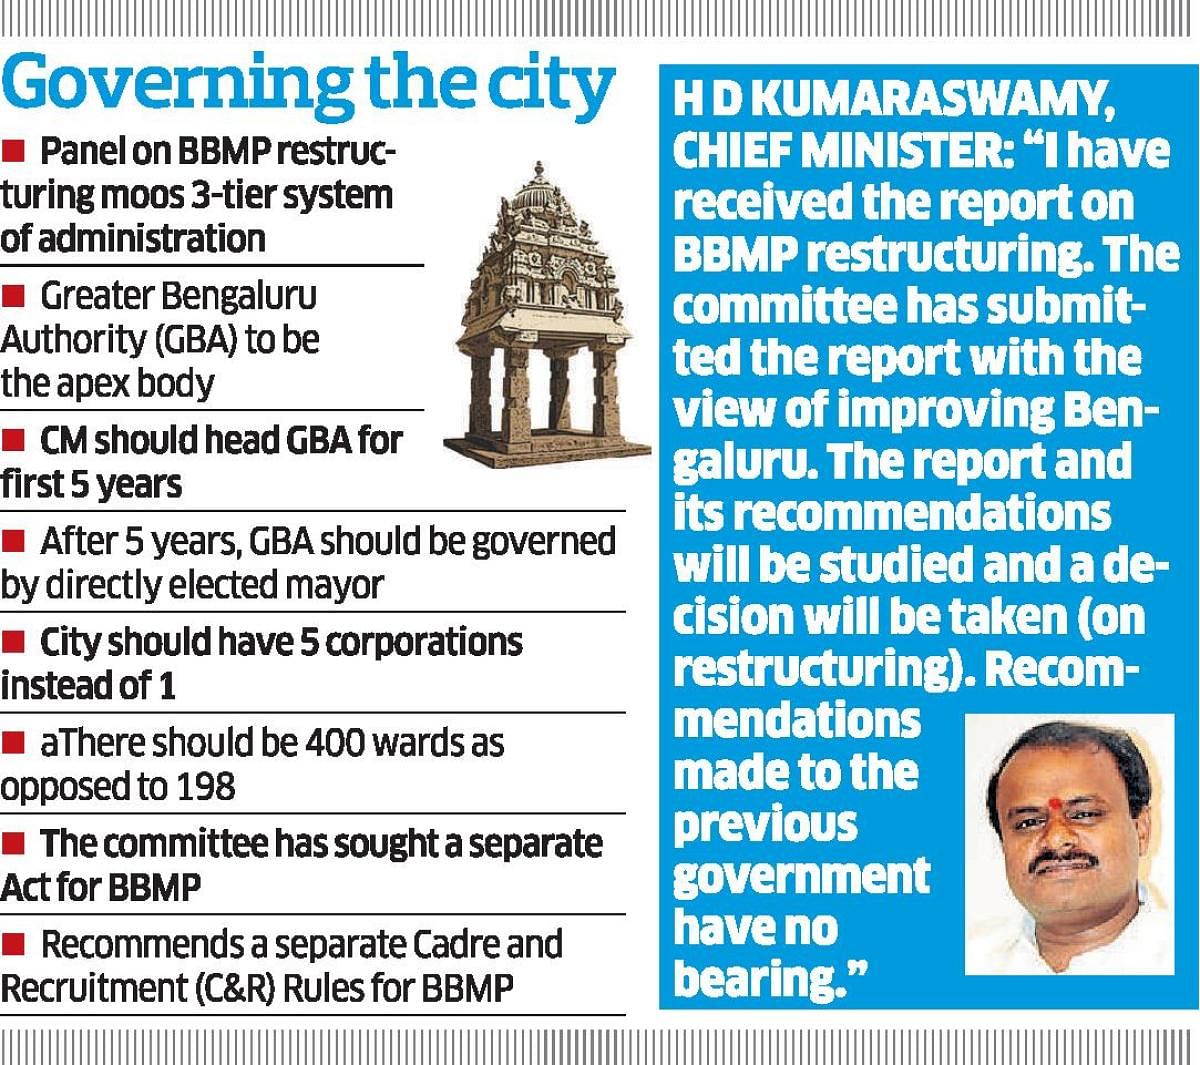 Governing the city - Greater Bengaluru Authority